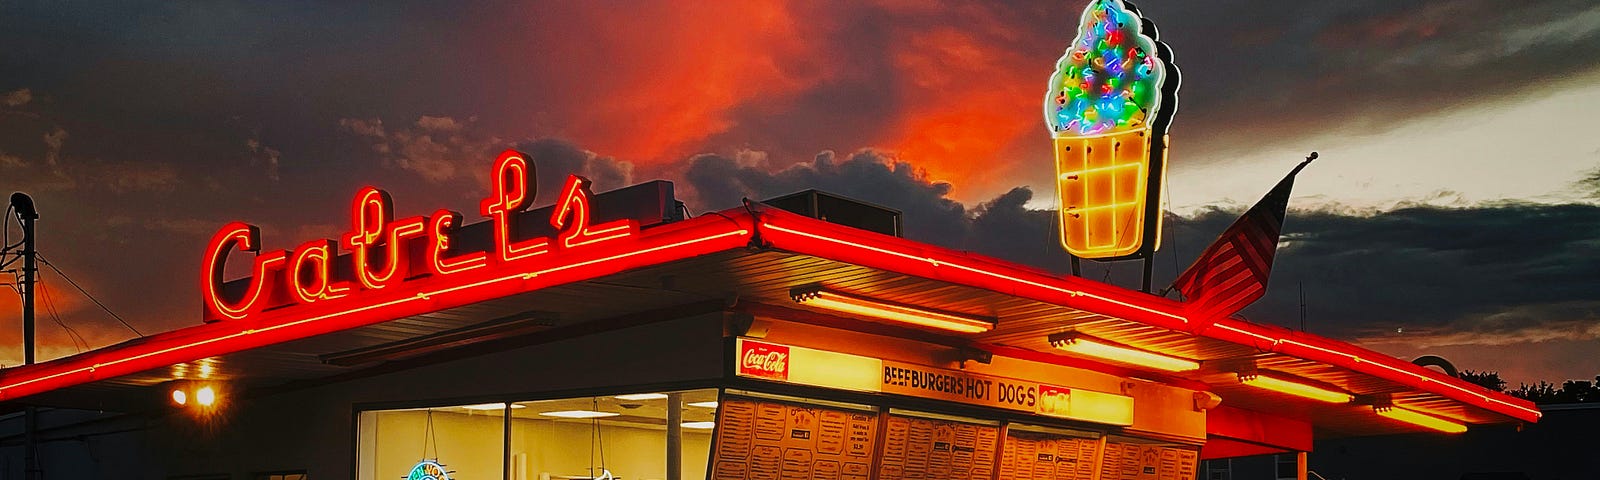 An authentic 1950’s style walk-up / drive up ice-cream parlor, with red neon lettering that says “Gabel’s” and a neon cone above more red neon piping. An American flag is barely visible as the sky darkens at sunset, with orange and dark blue clouds.